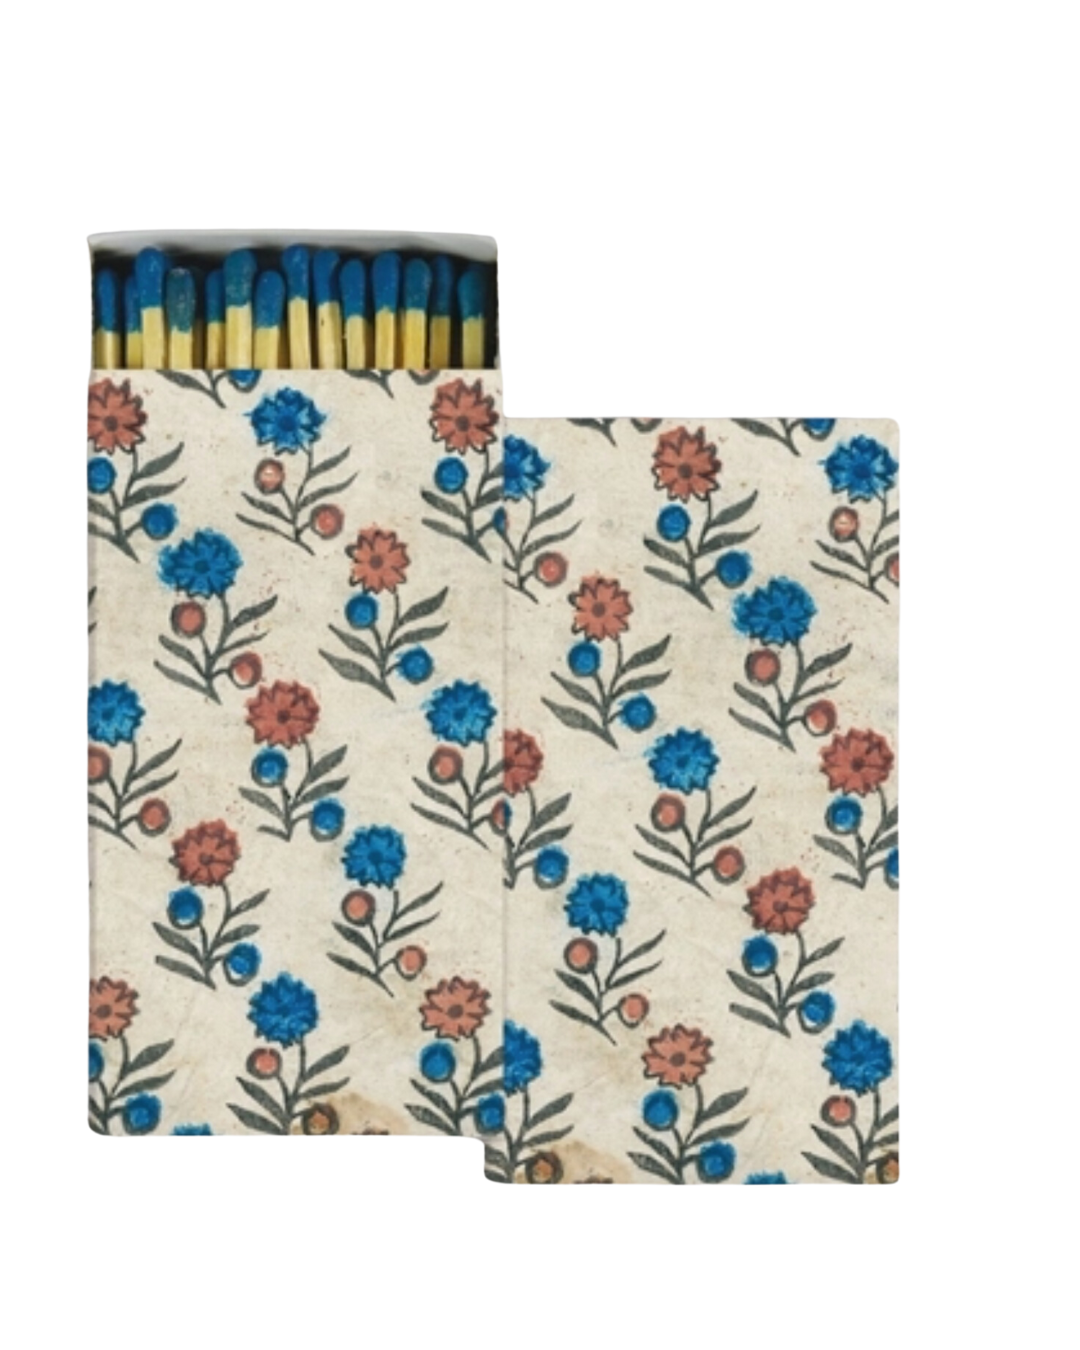 A small matchbox of HomArt safety matches with a floral print featuring blue and orange flowers on a beige background. The striking surface is visible with several unused yellow matchsticks peeking out, reminiscent of the vibrant sunsets in Scottsdale, Arizona.